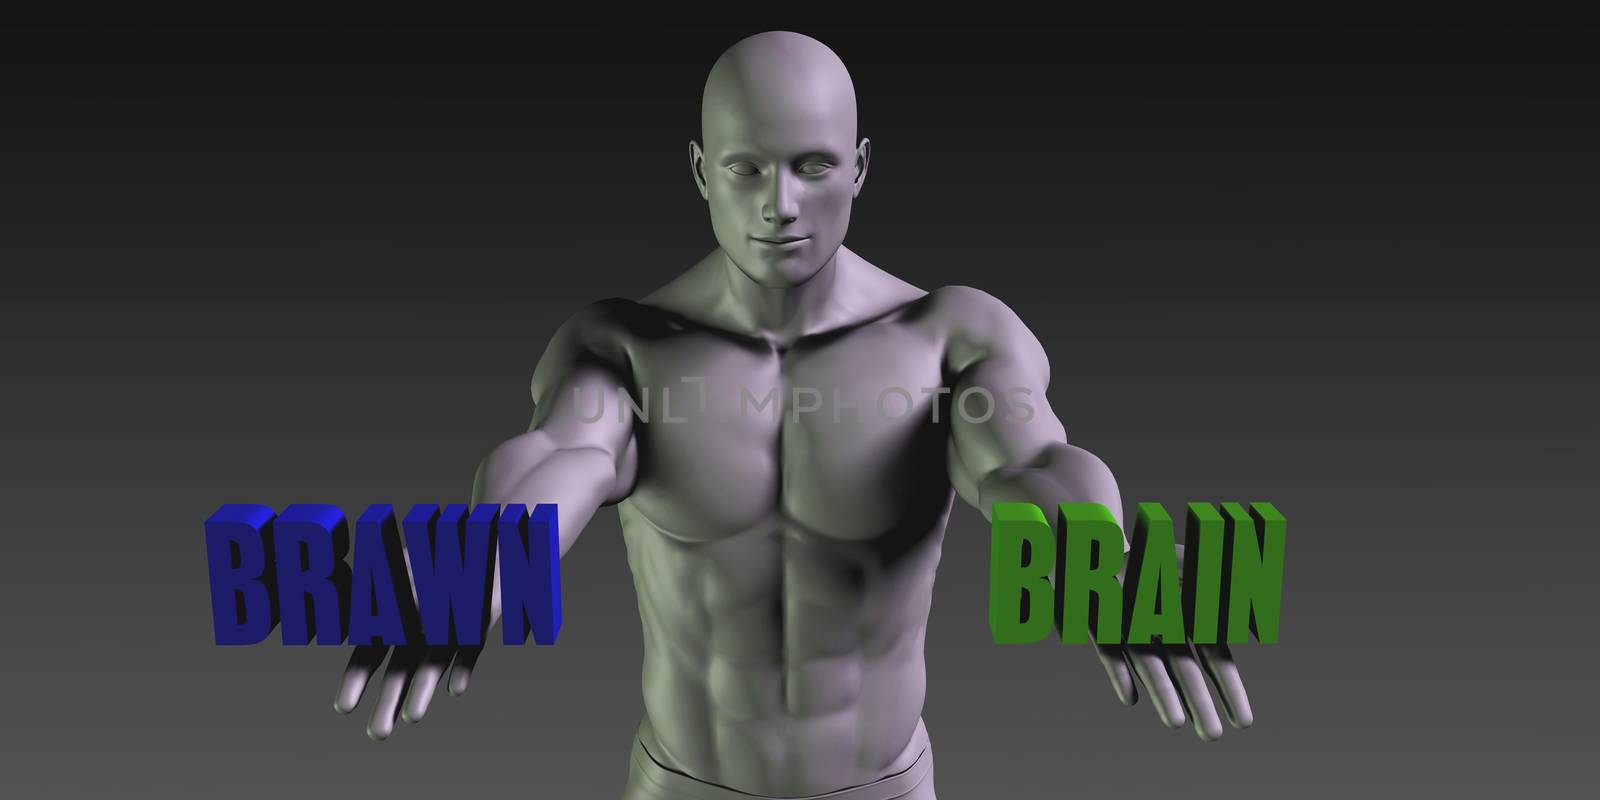 Brain vs Brawn Concept of Choosing Between the Two Choices